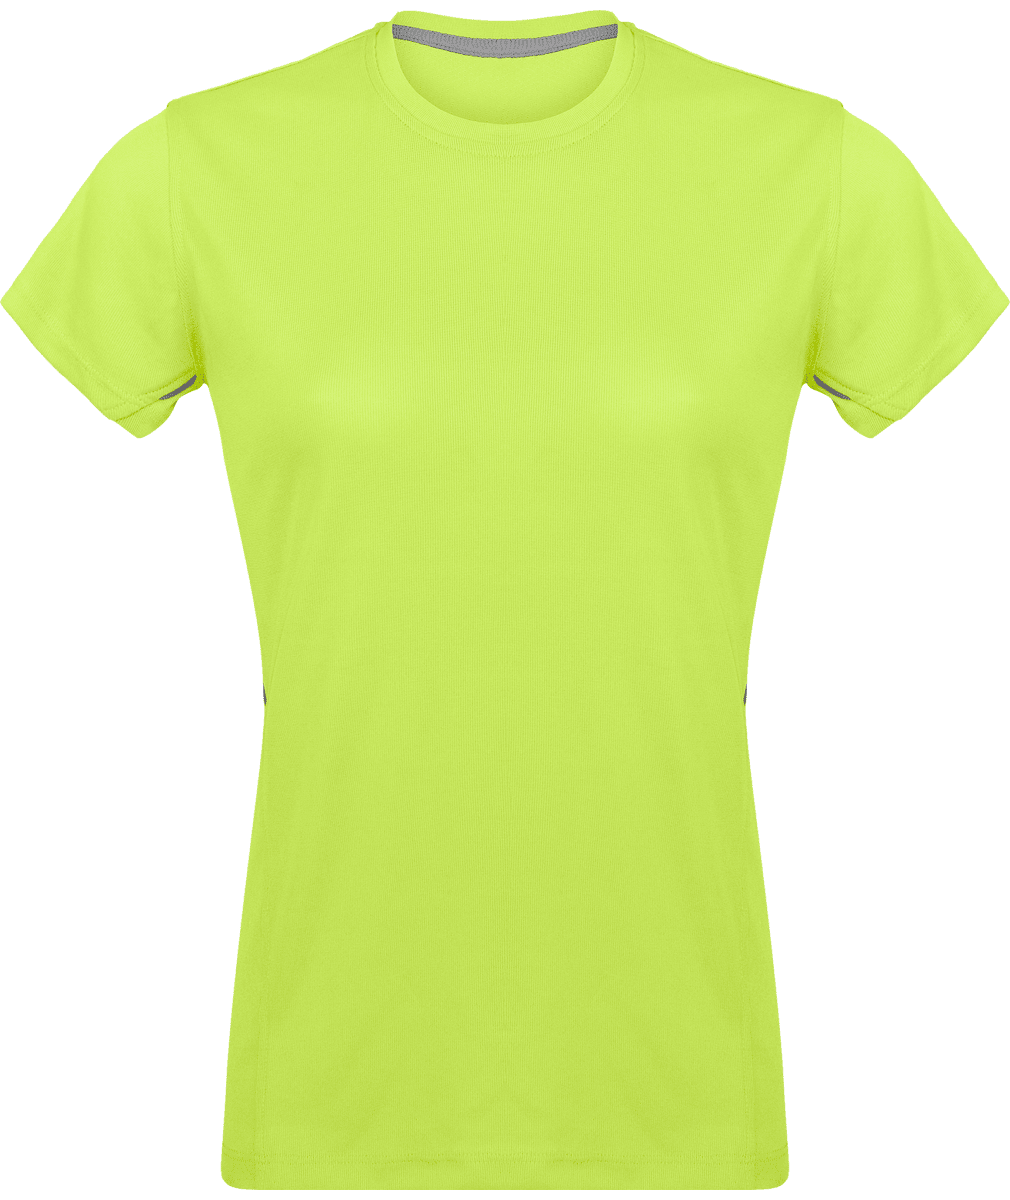 Women's Sports T-Shirt | Light And Breathable | Bi-Material Lime / Silver